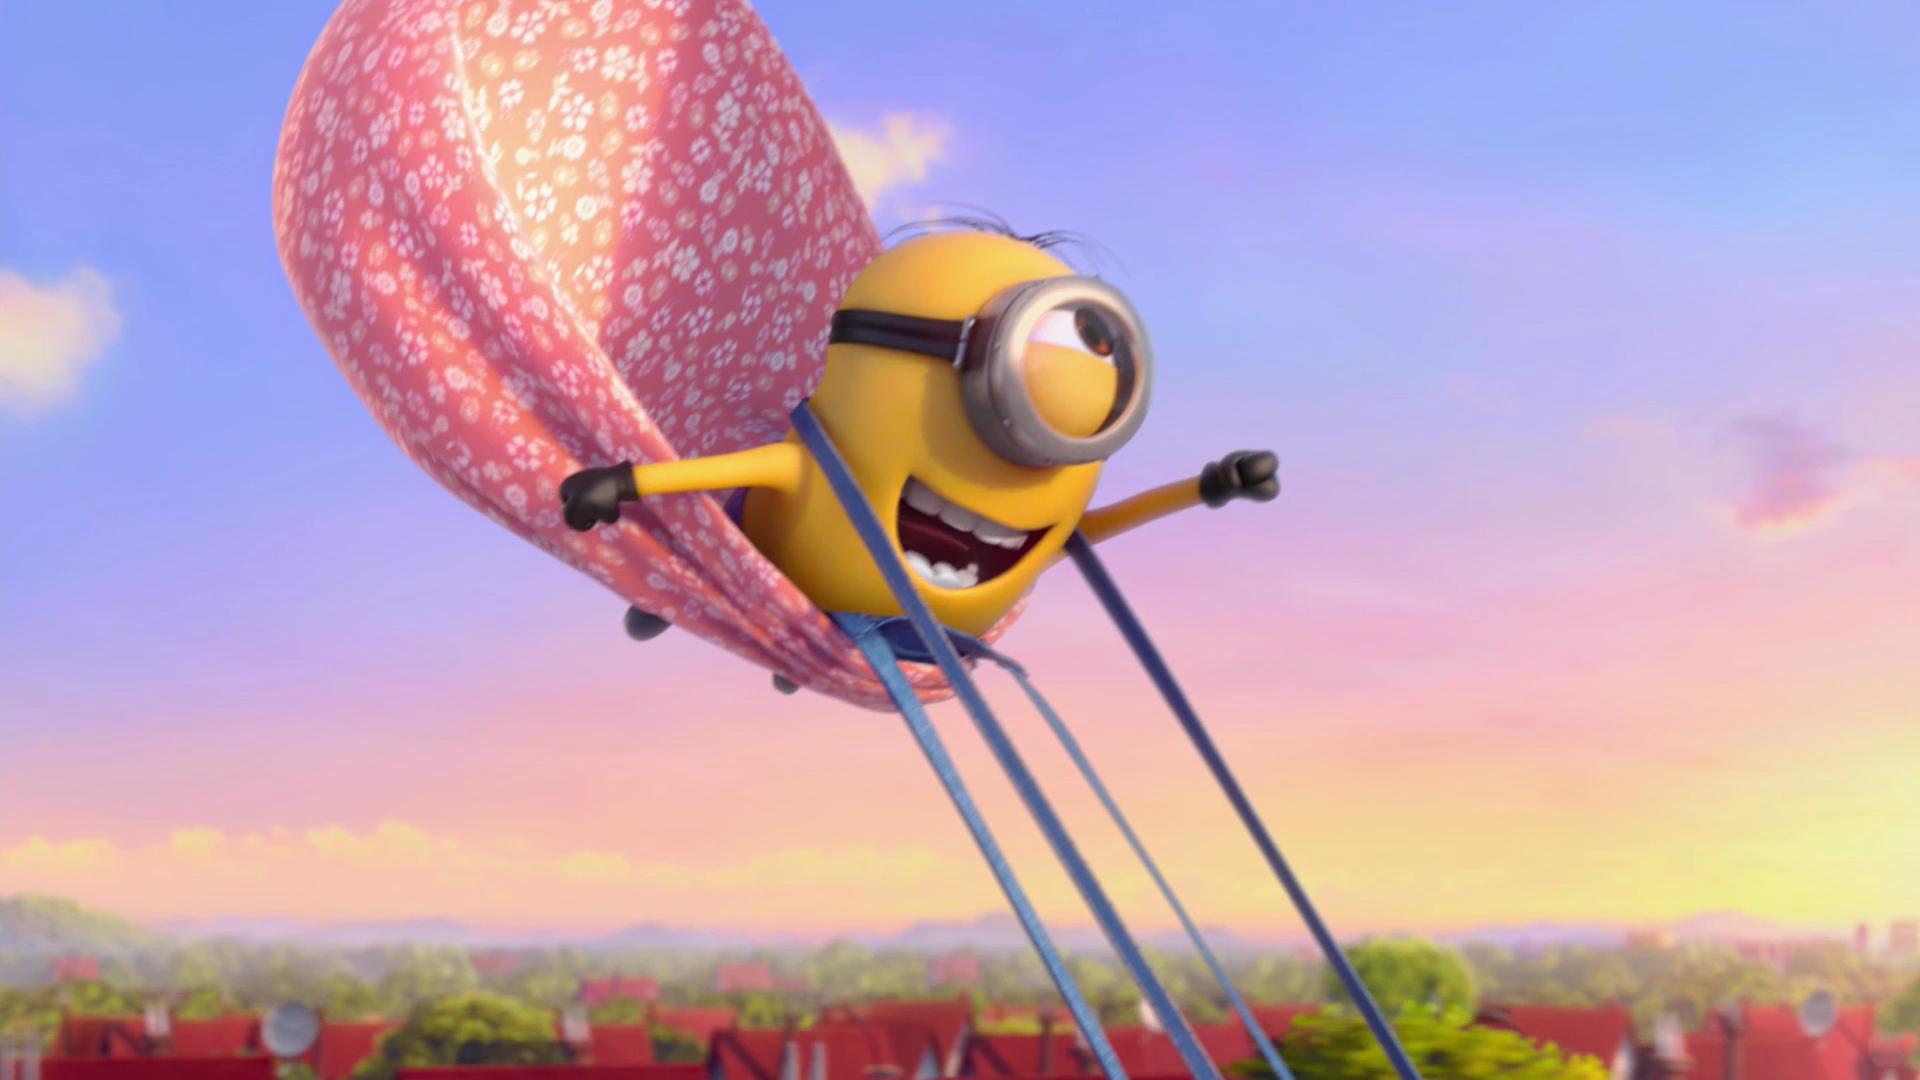 Dispicable Me Wallpapers - Wallpaper Cave